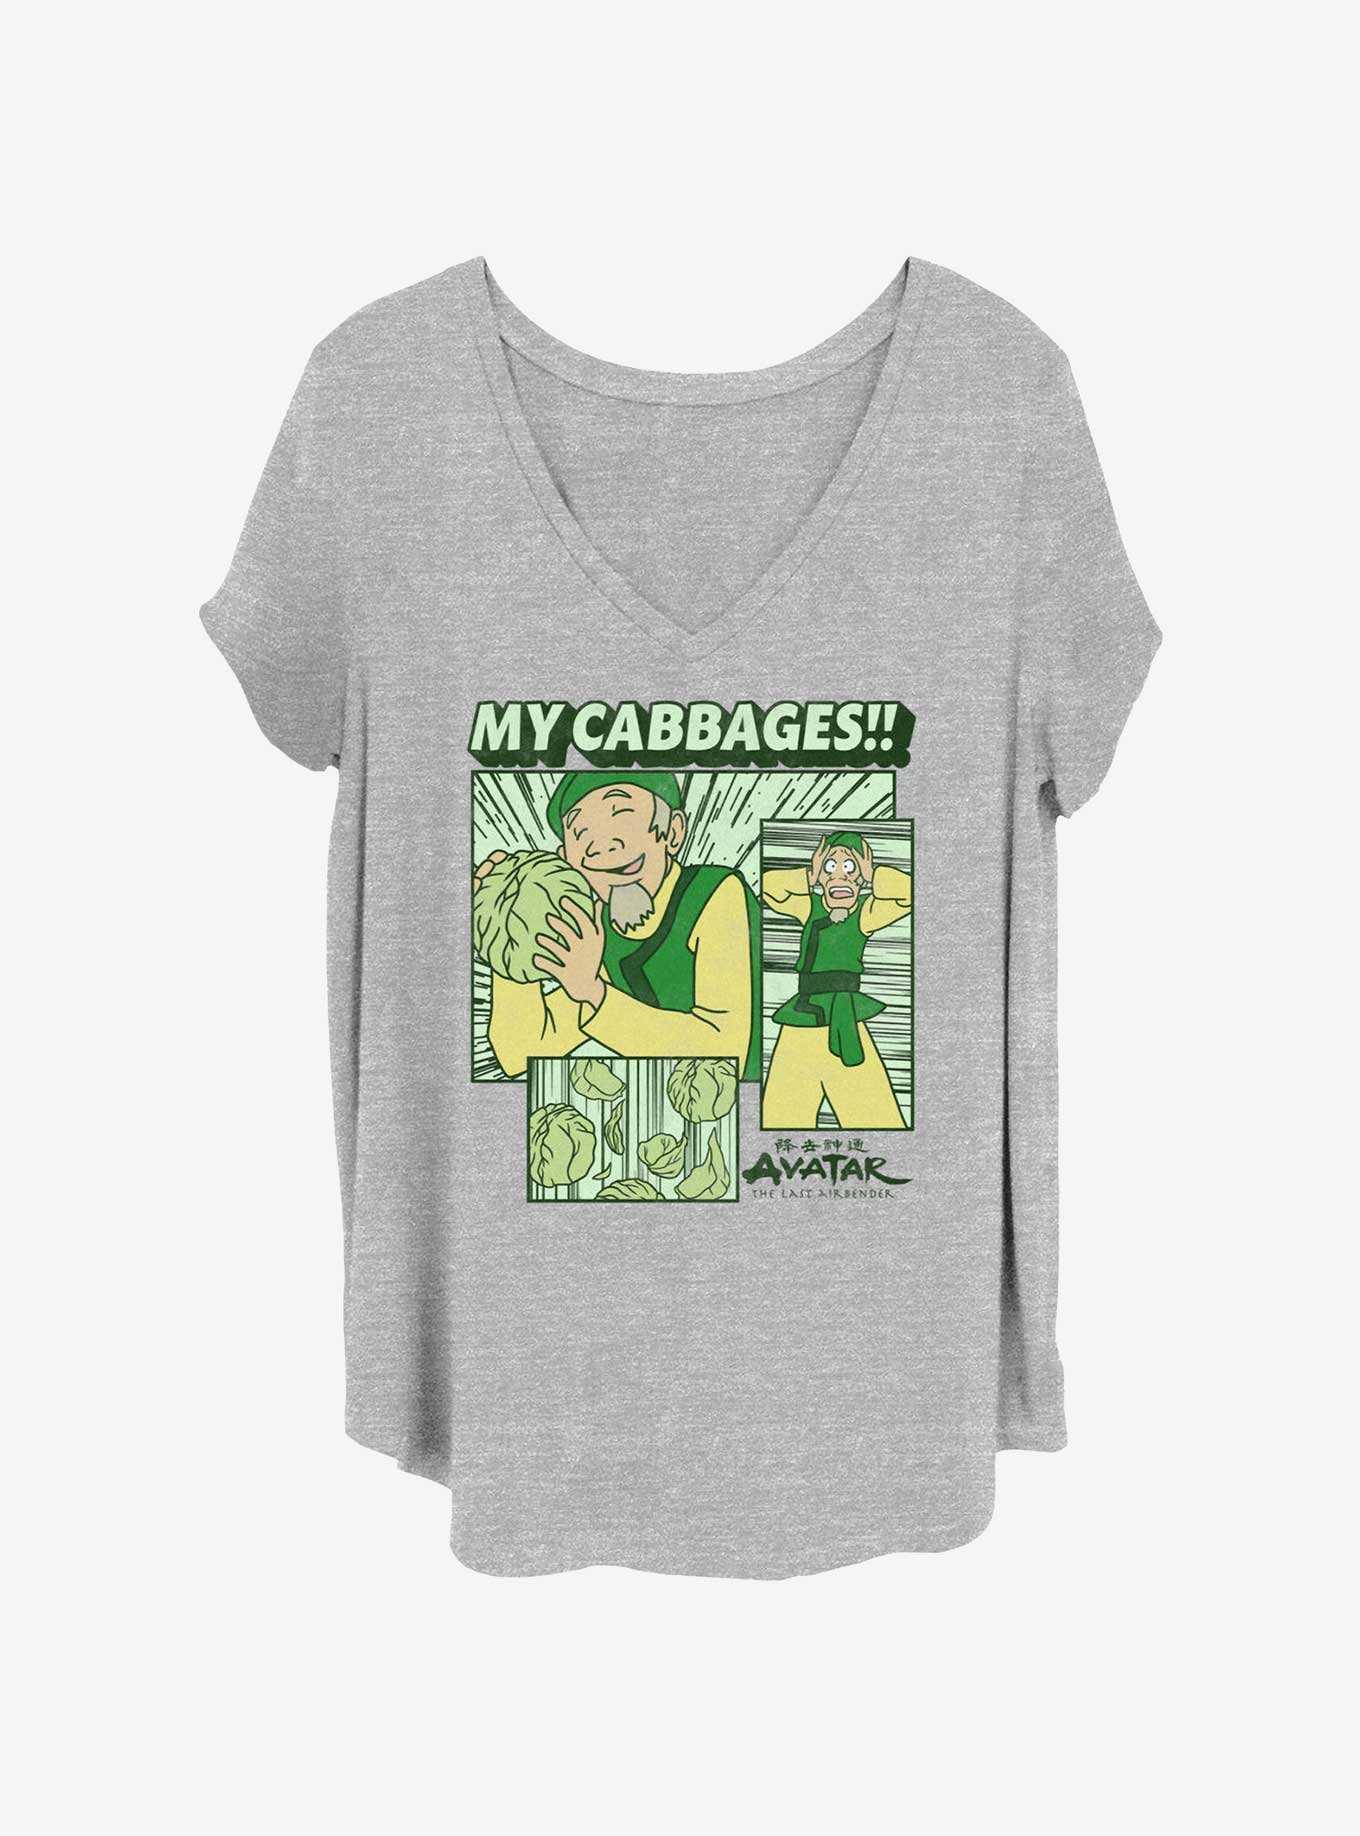 Avatar: The Last Airbender My Cabbages Womens T-Shirt Plus Size, , hi-res